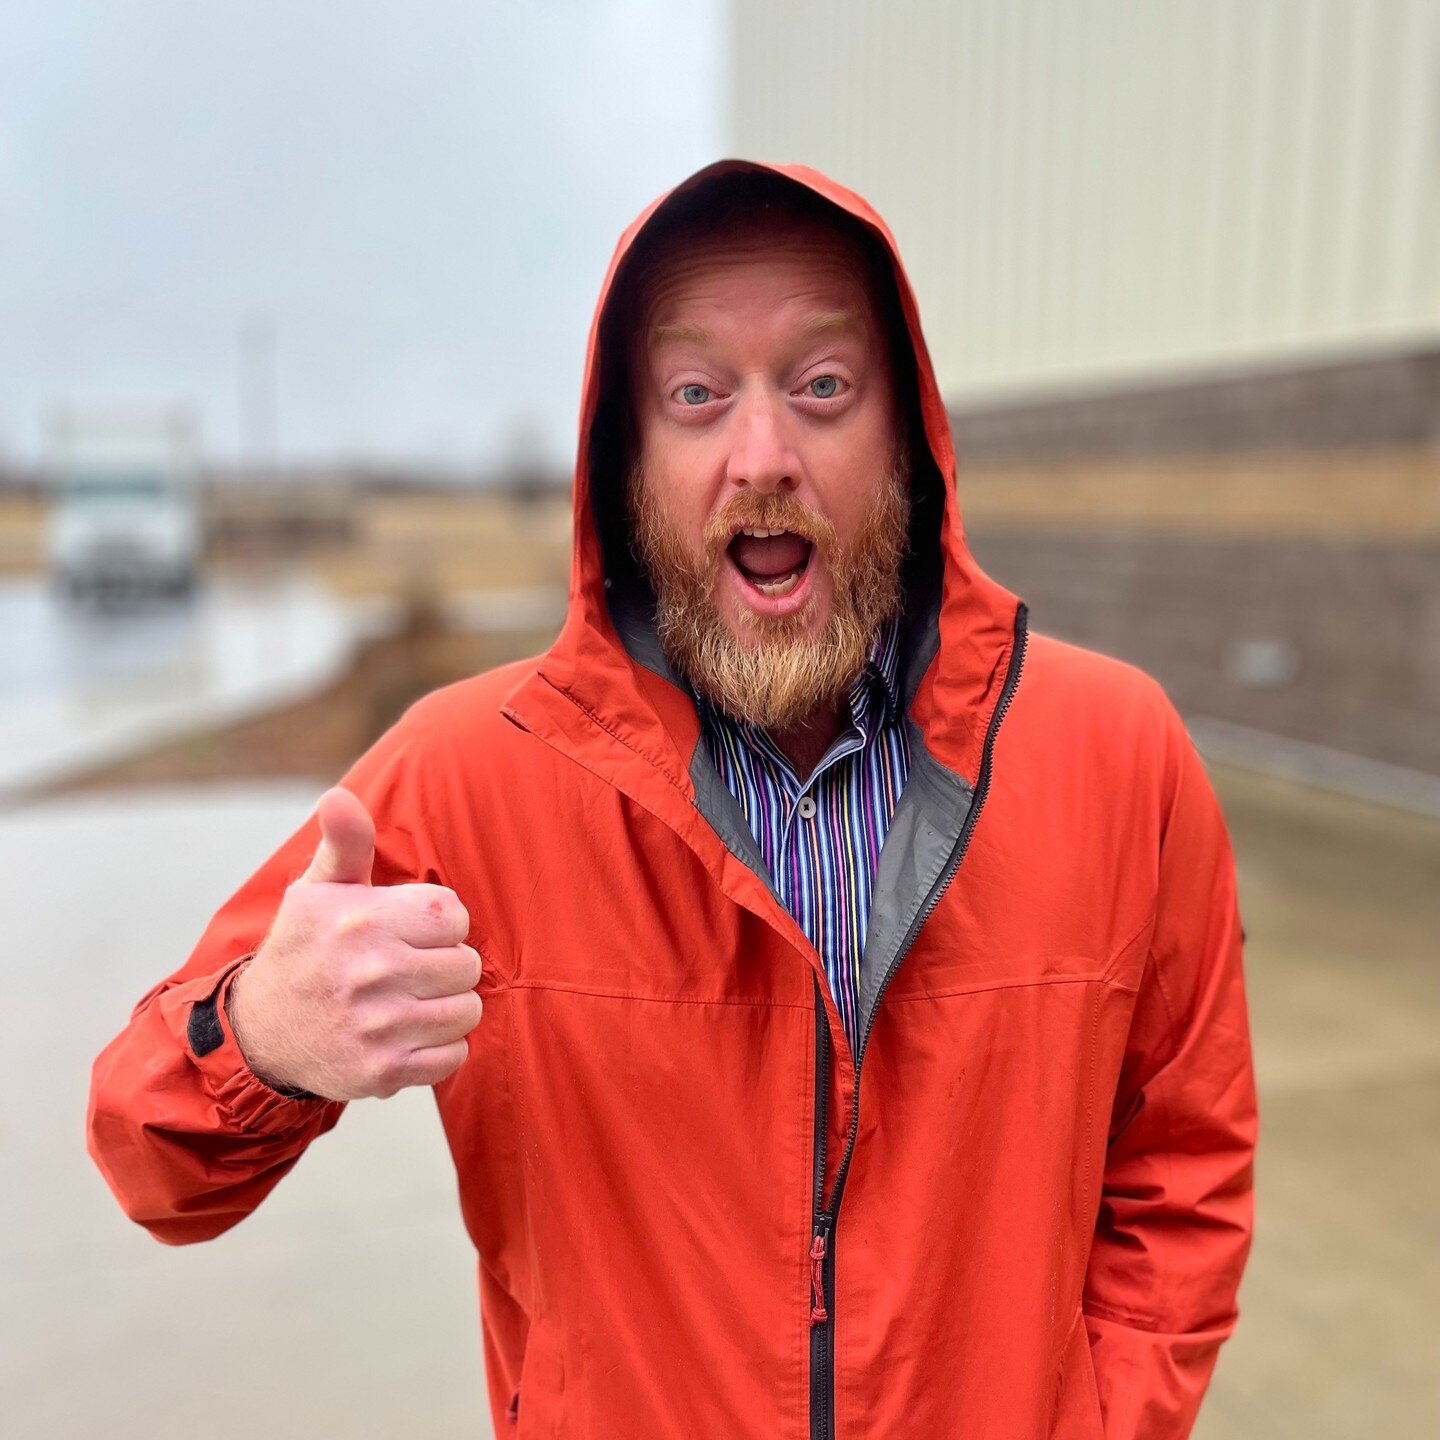 Executive Director Jacob Sheatsley has accepted his fate and is preparing to go in the dunk tank this Friday in the name of Open Avenues! 🥶 
We just have to raise $940 more to save our board and staff from taking his place. Please help us get there!